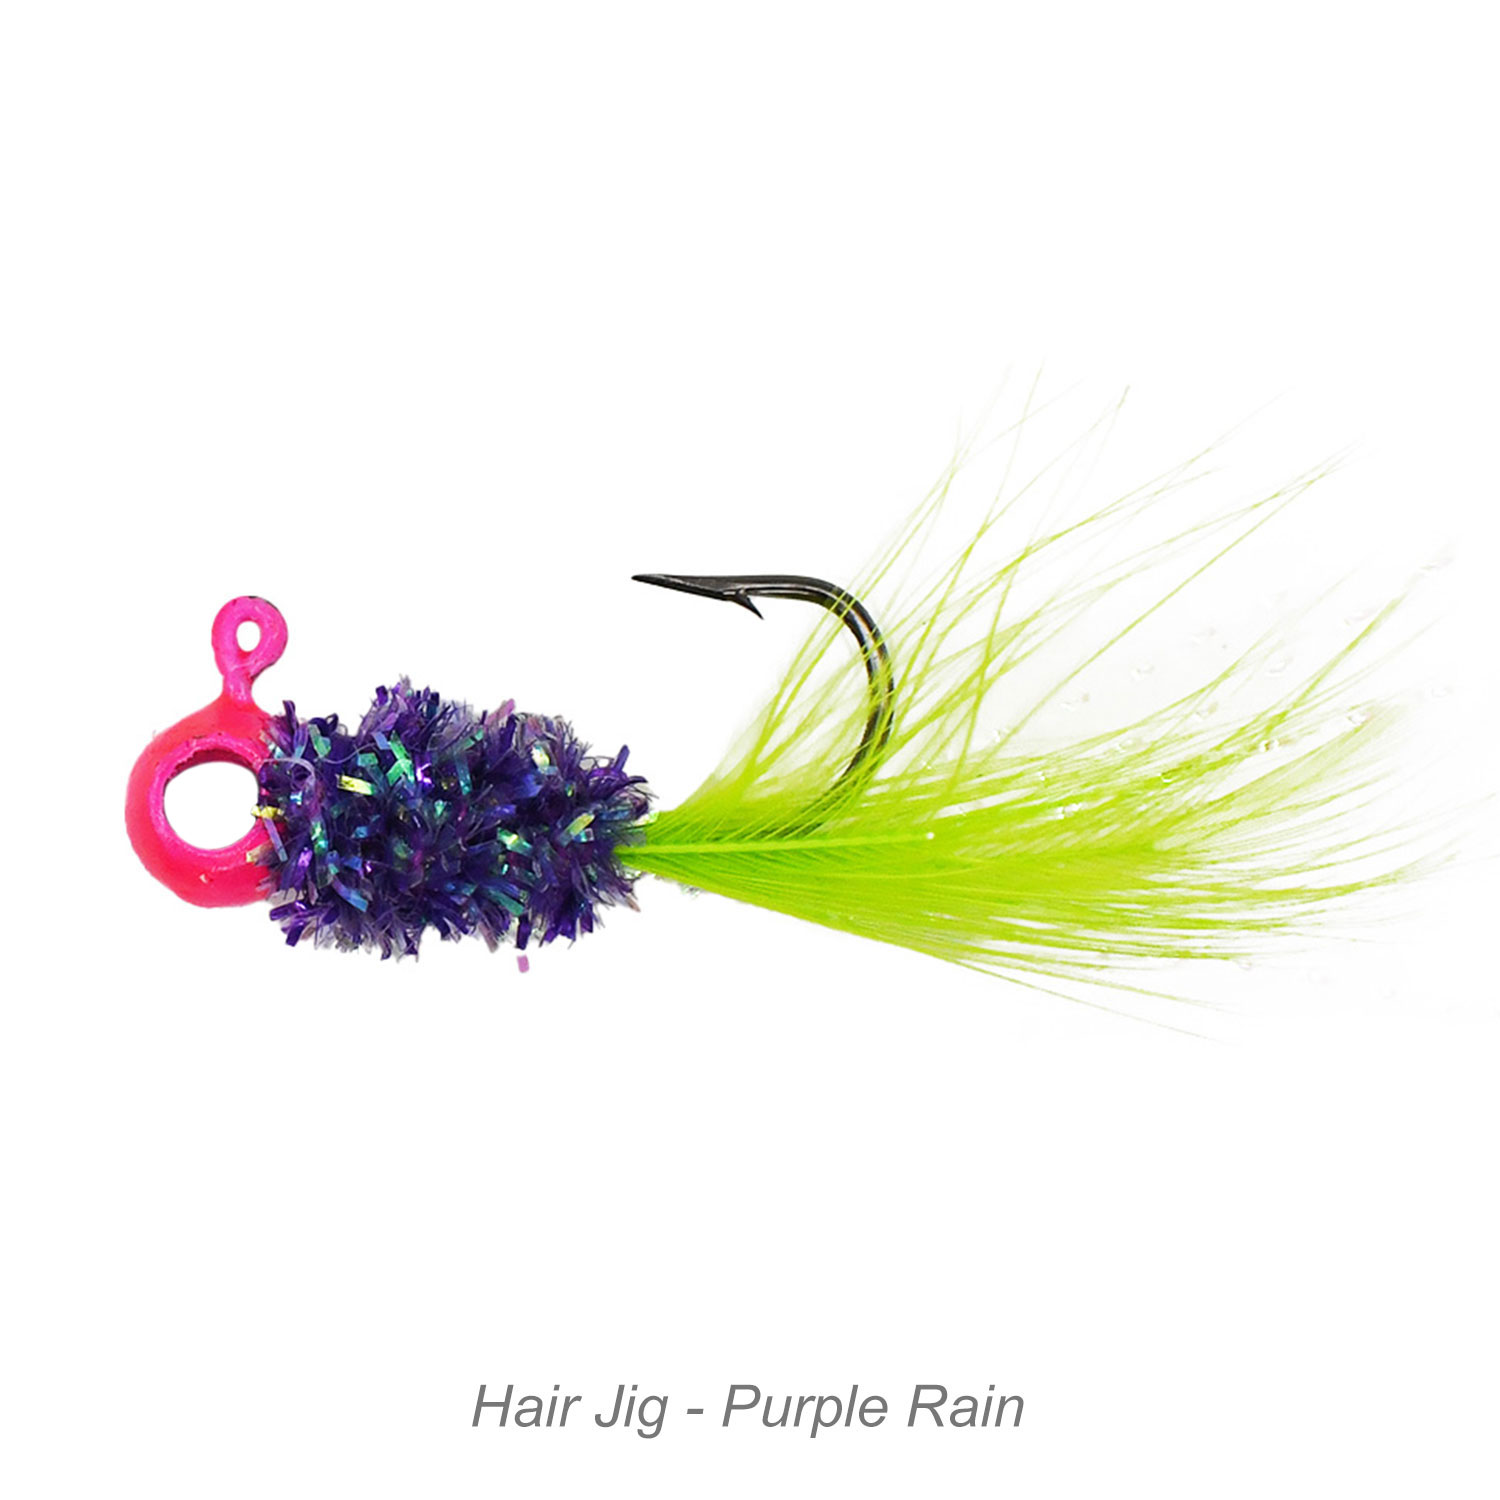 Jigs Guaranteed to Catch Crappie, Why They Work, Hair Jigs